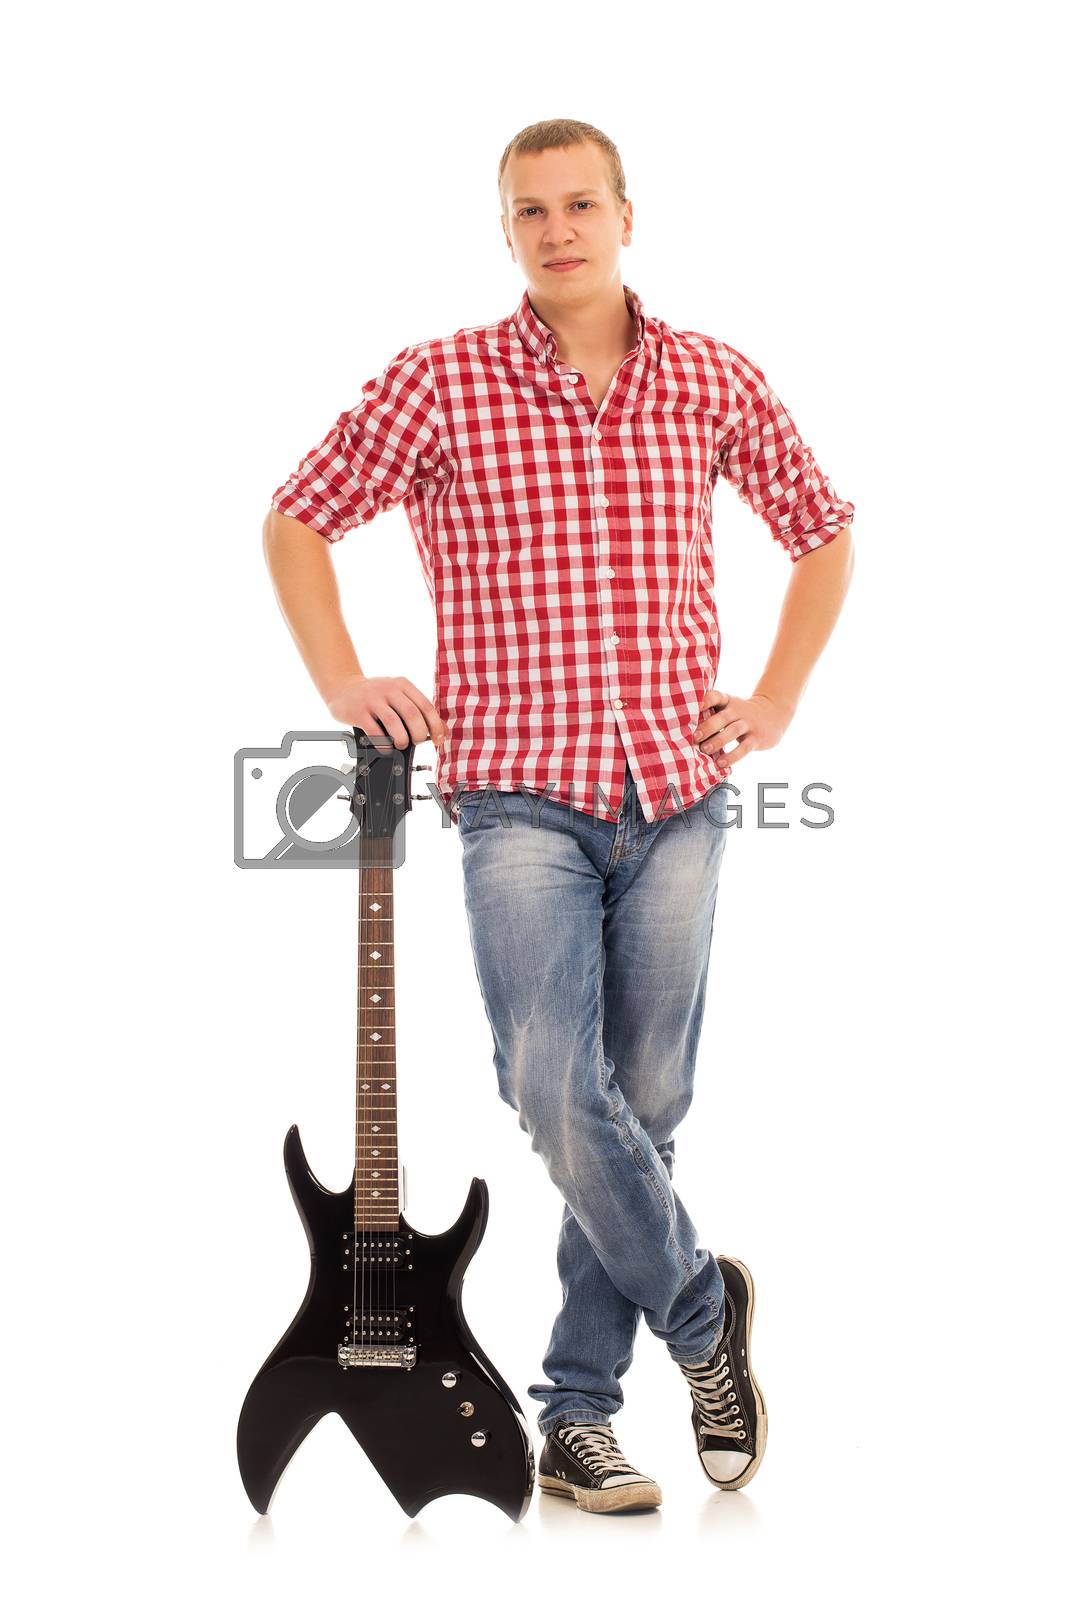 Royalty free image of Young musician with a guitar by rufatjumali